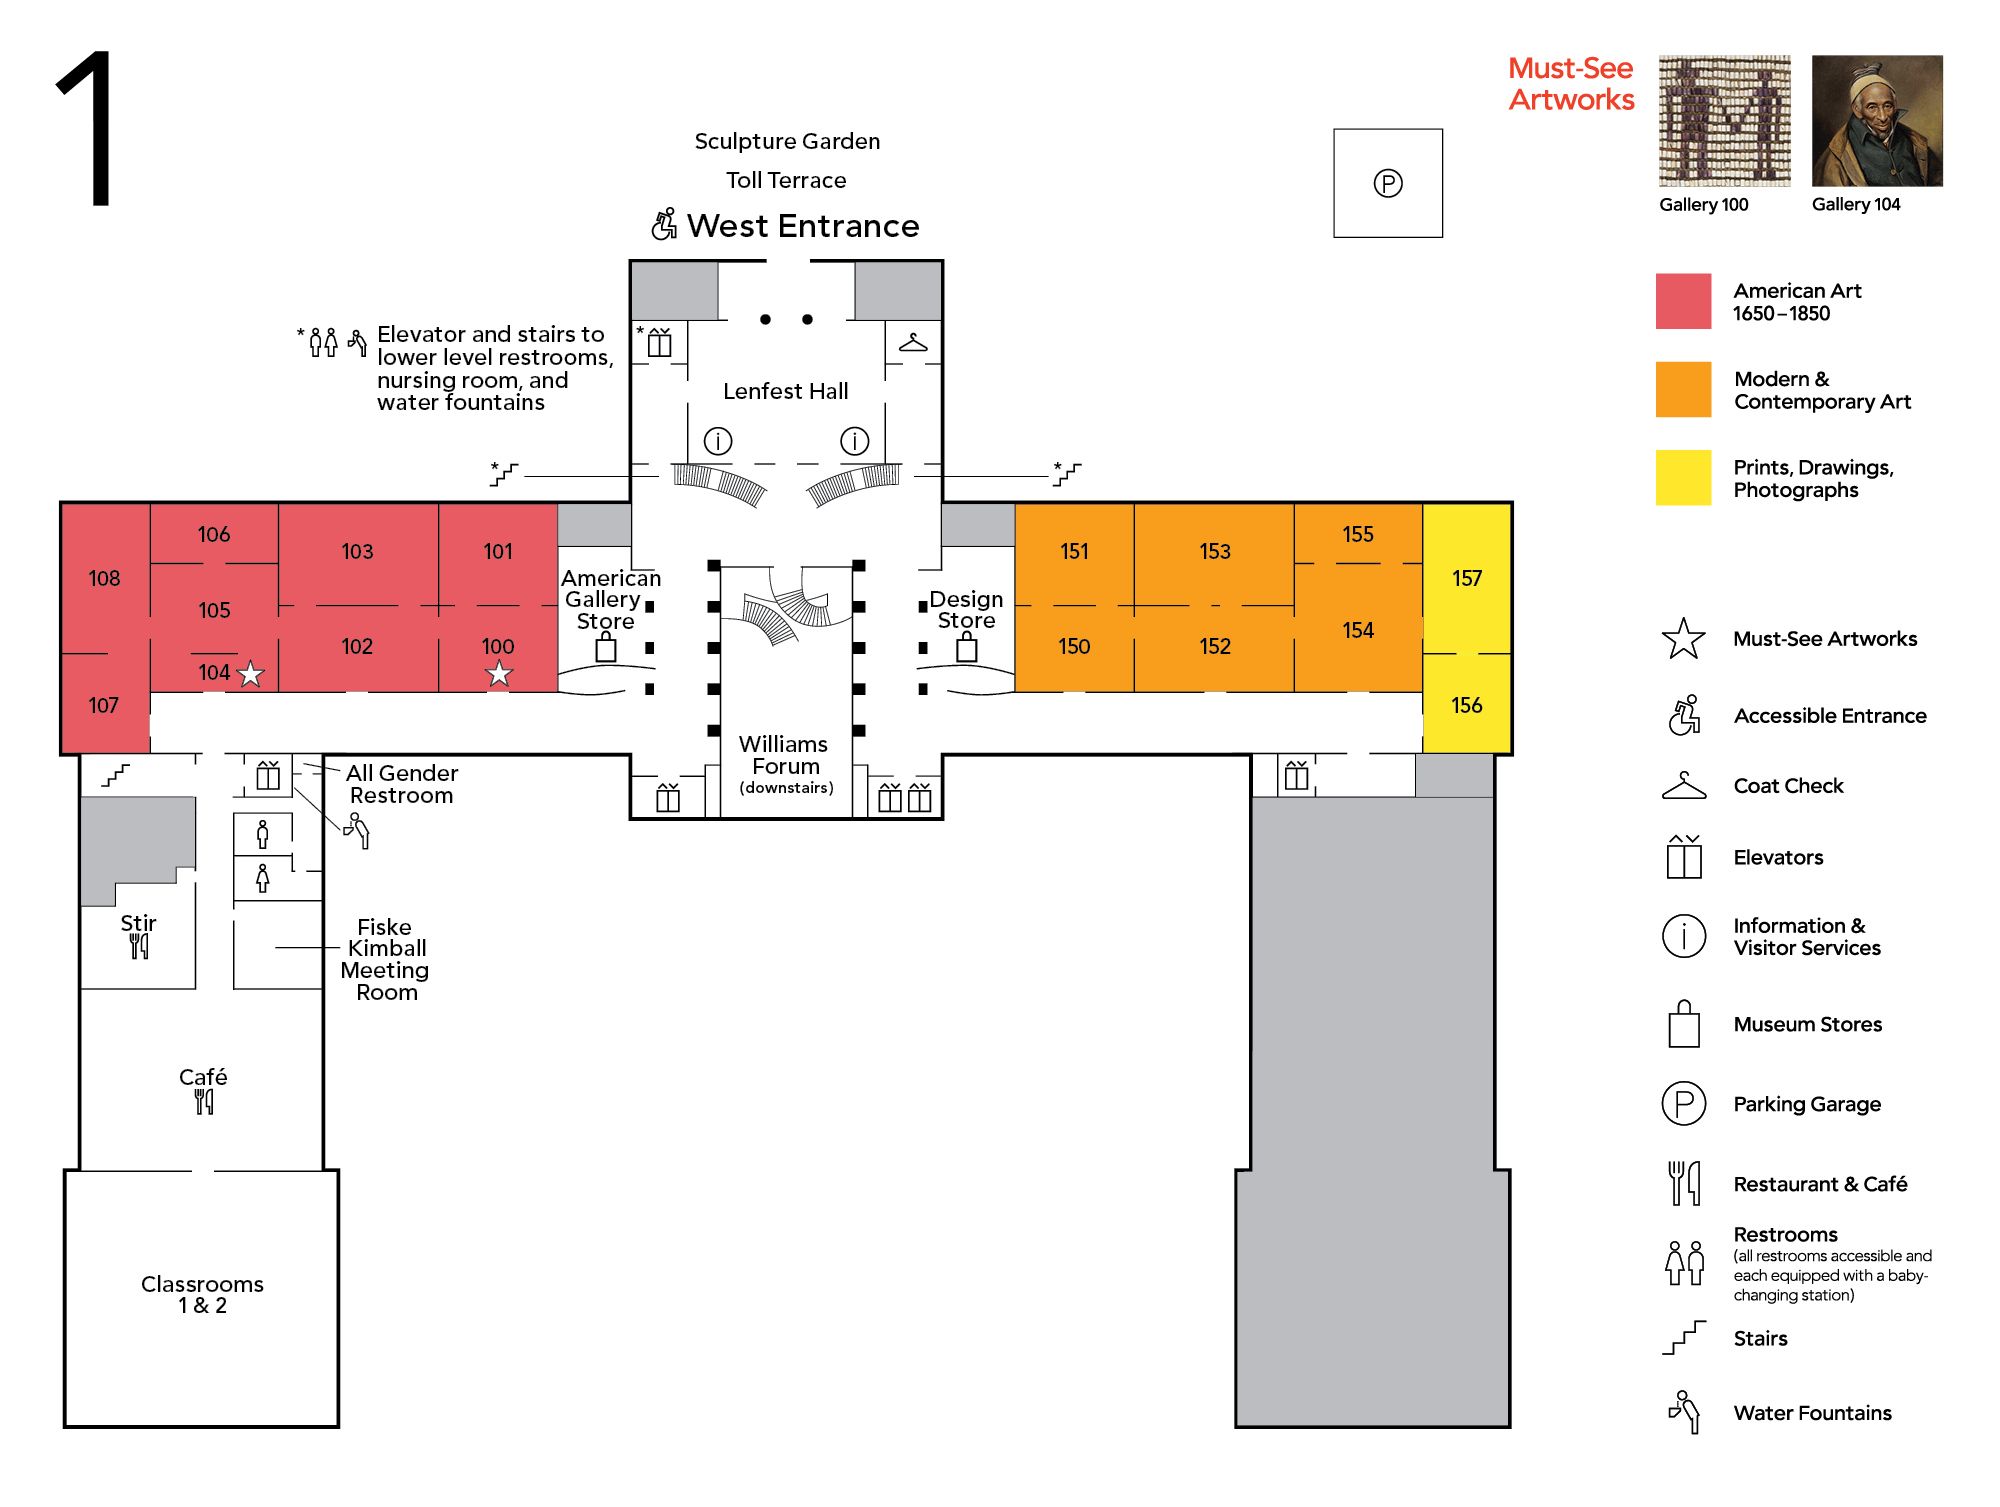 A map showing the first floor layout of the Philadelphia Museum of Art.